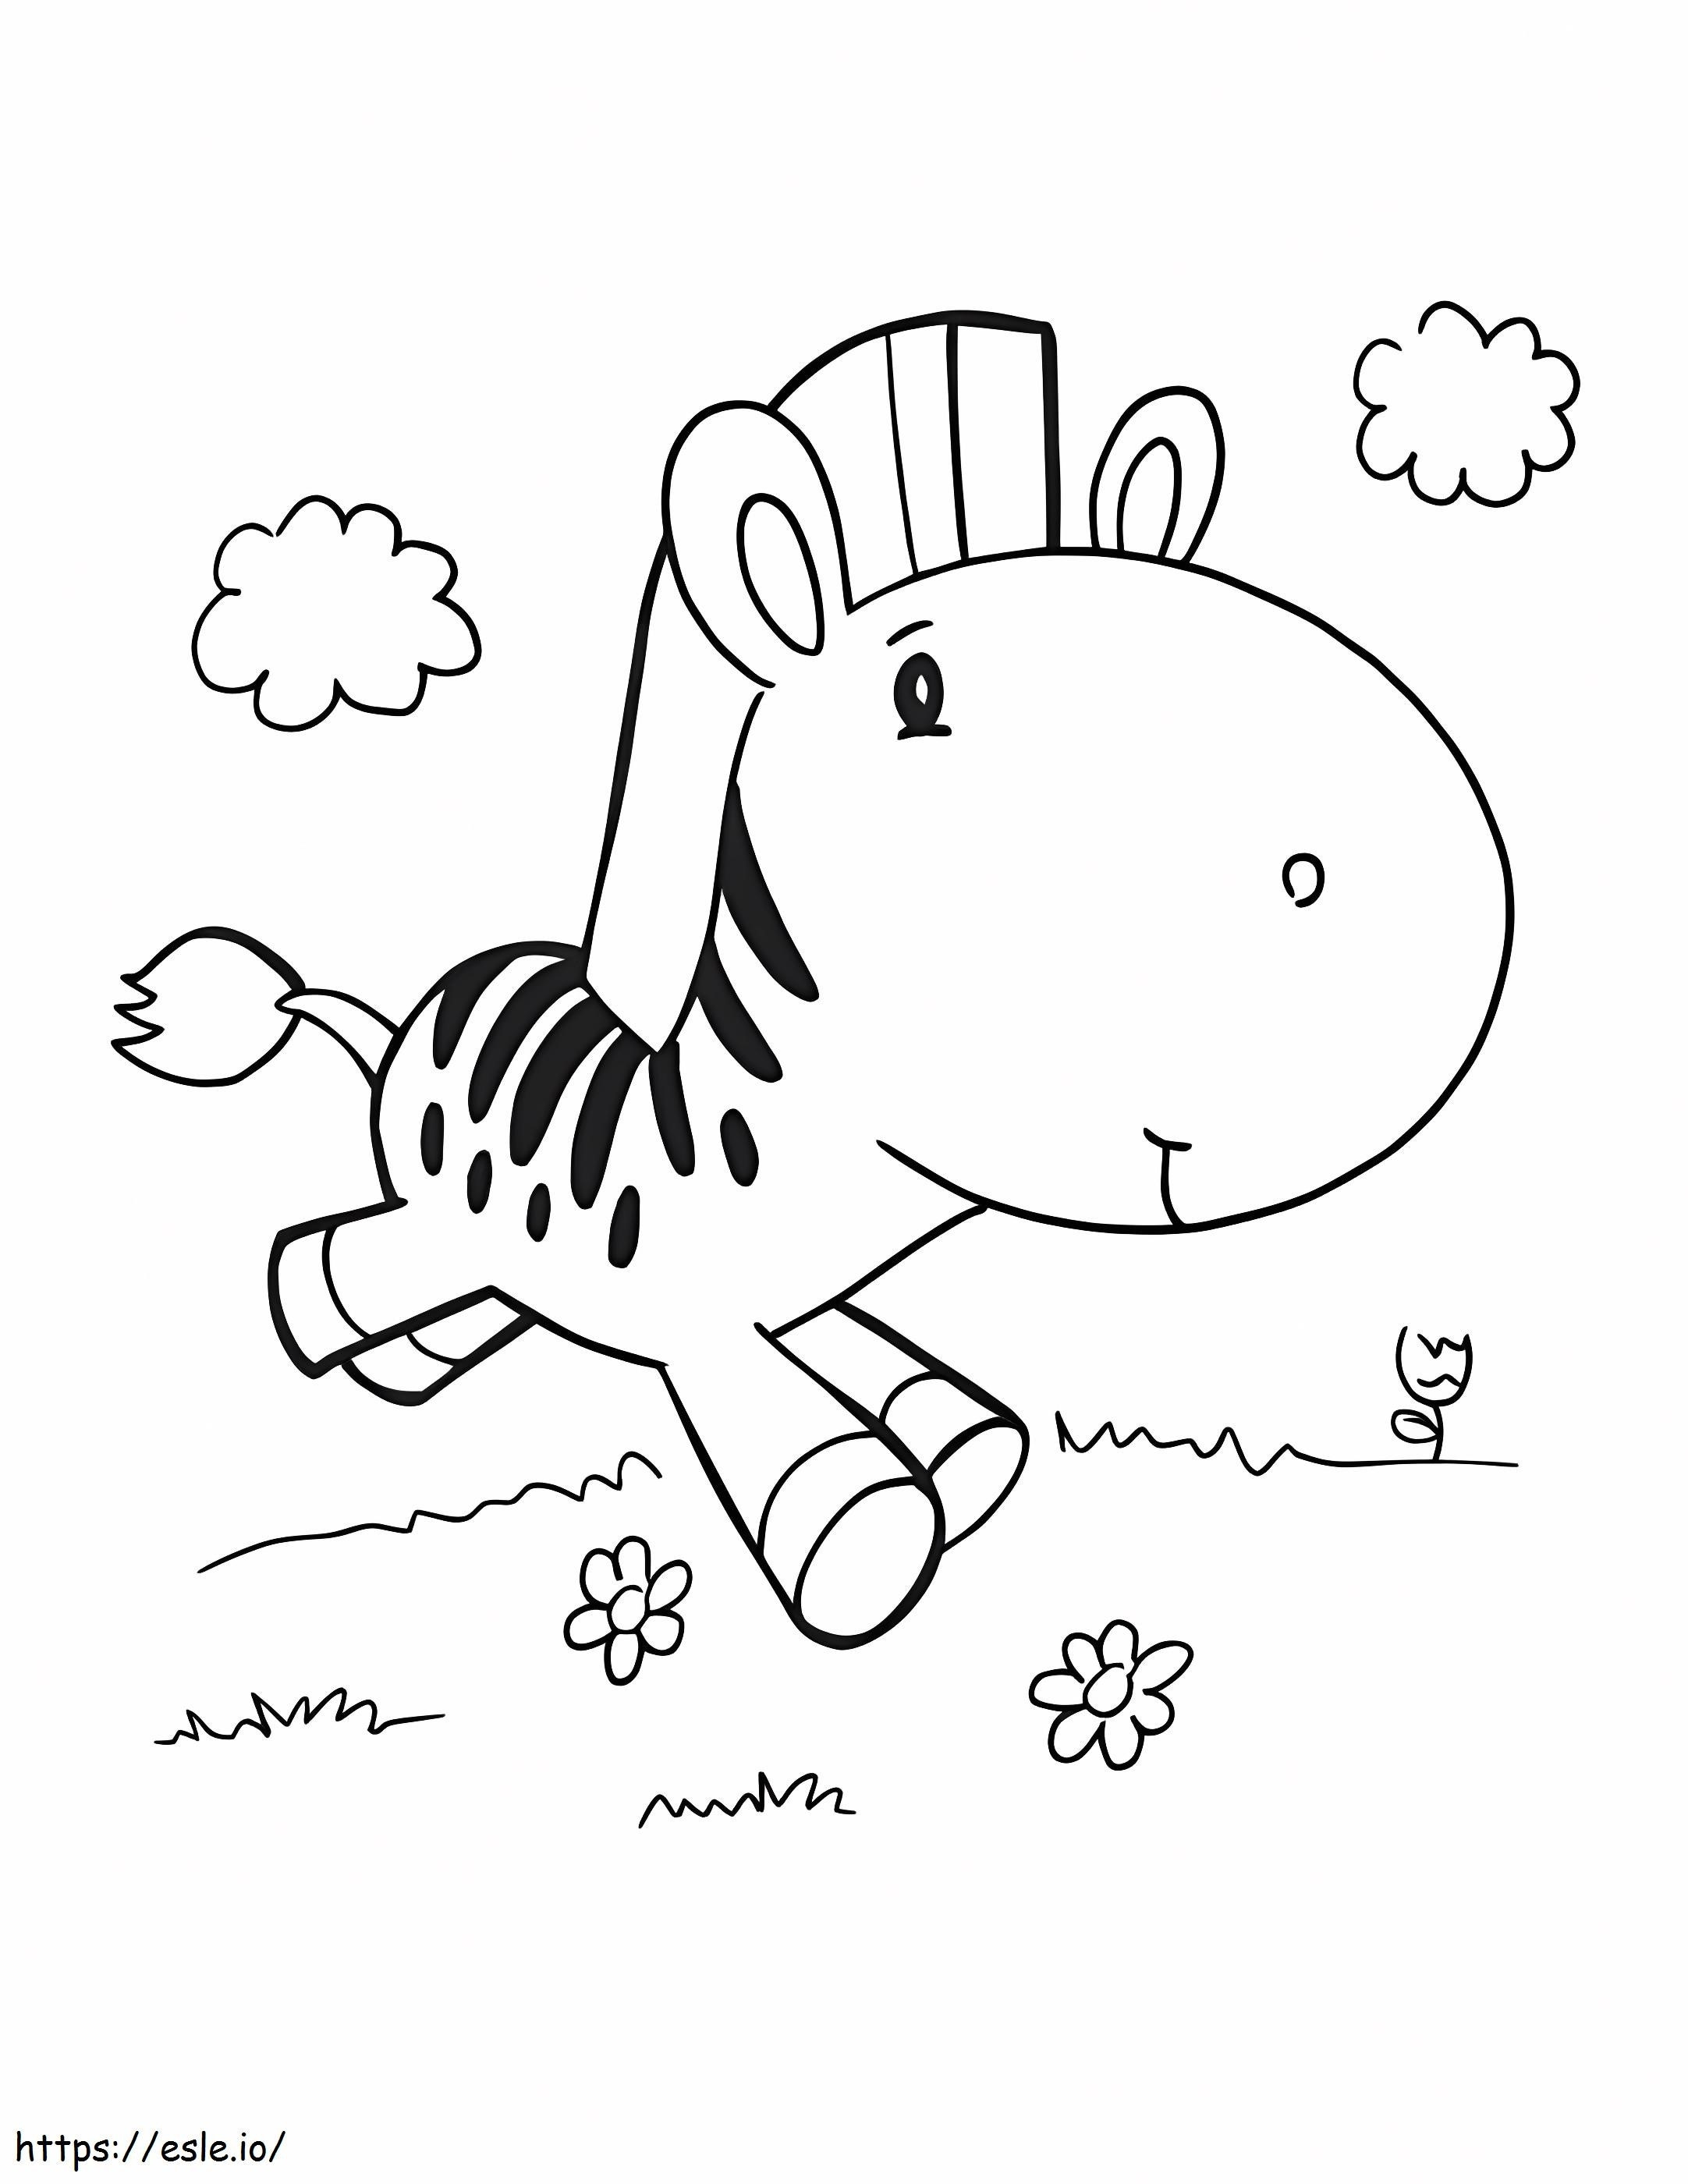 Baby Zebra Running coloring page